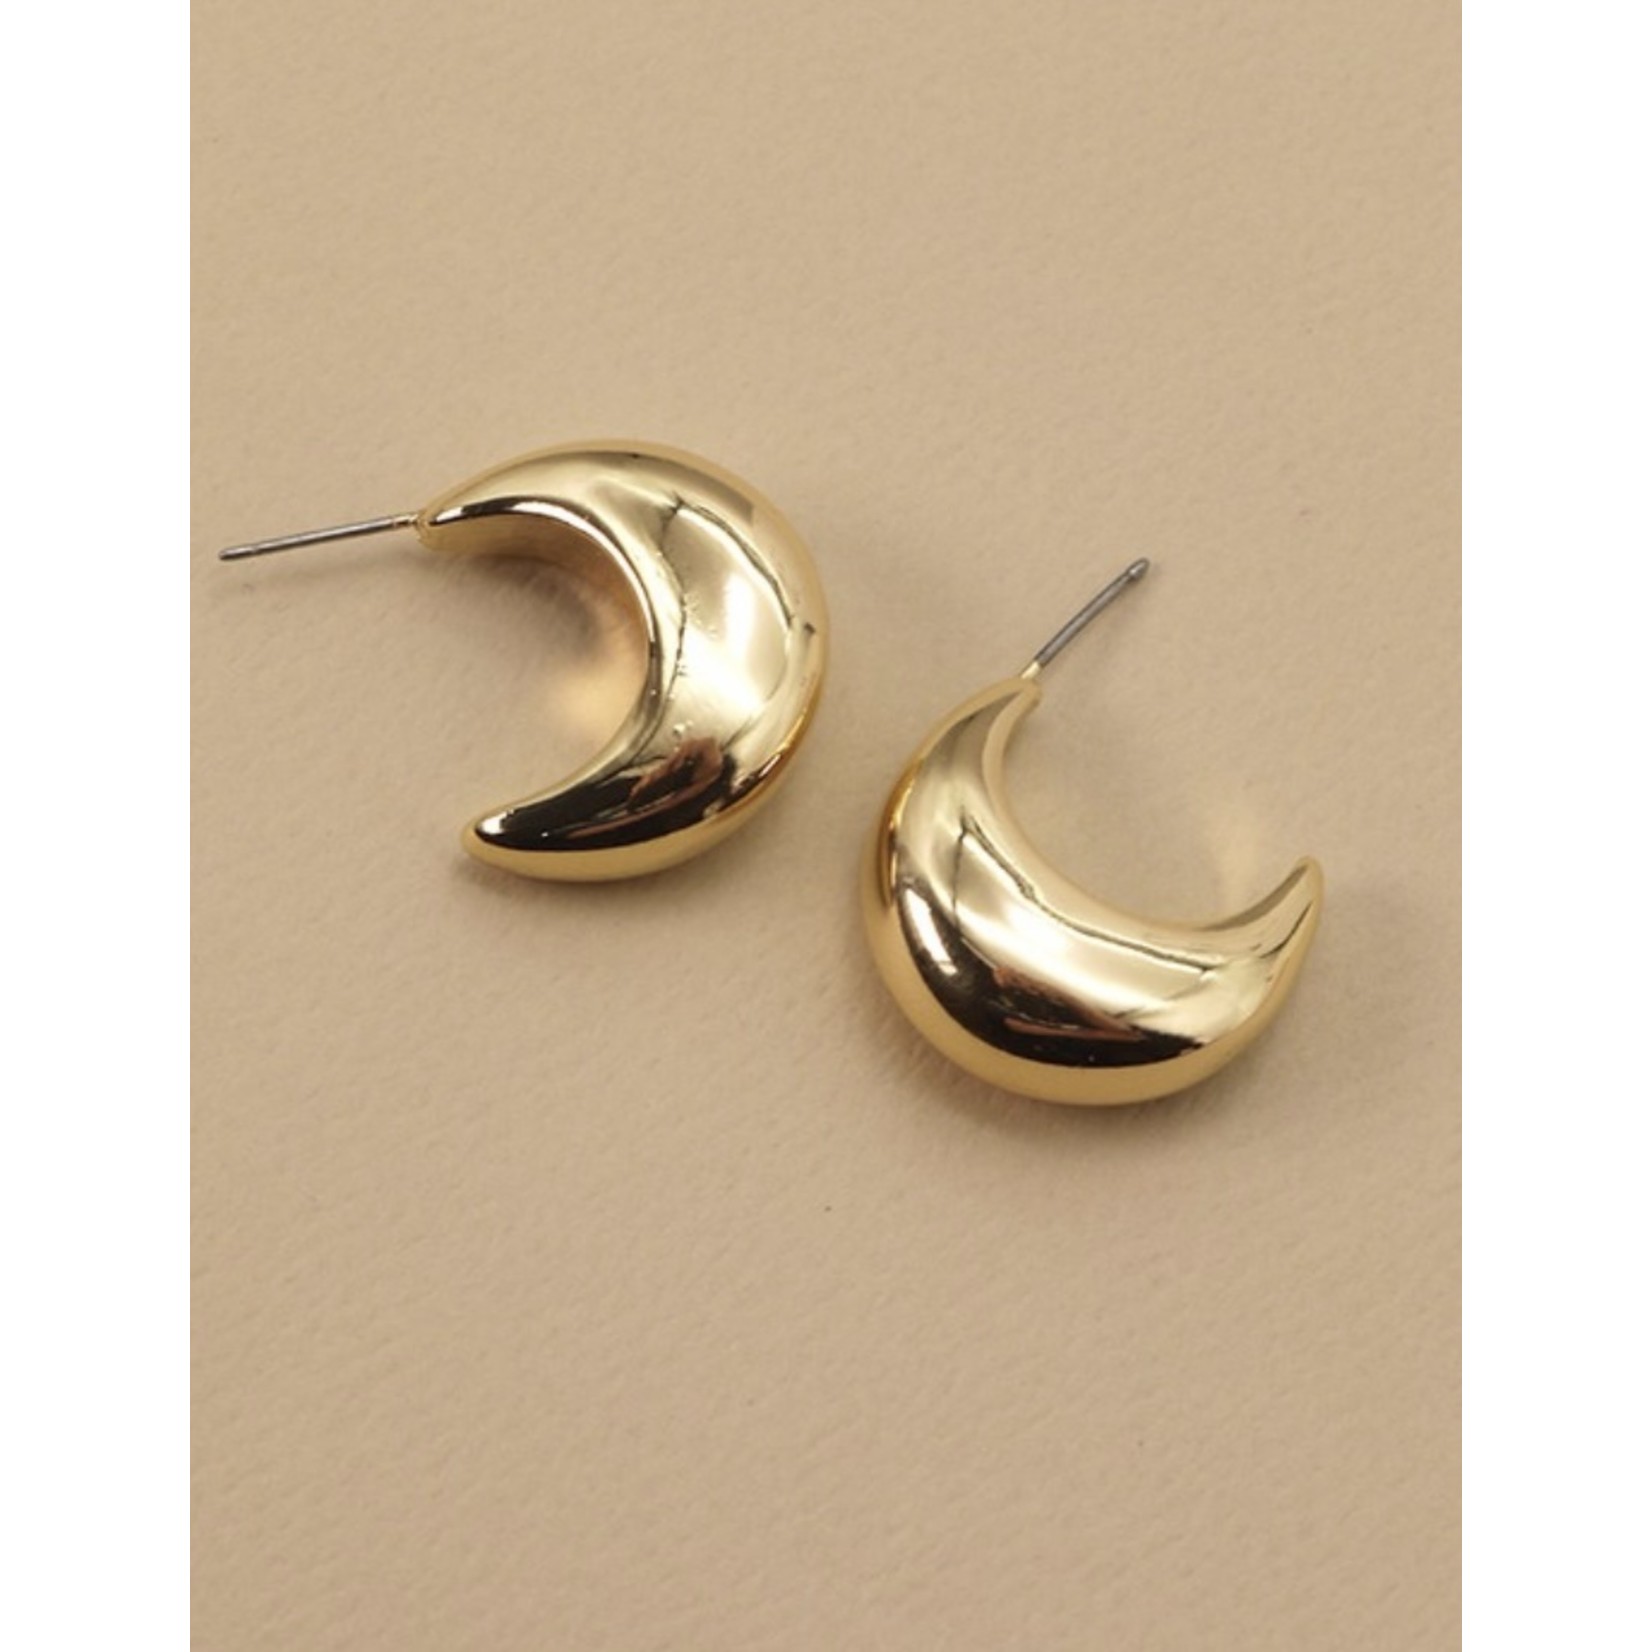 WALL TO WALL Crescent Moon Modern Earrings